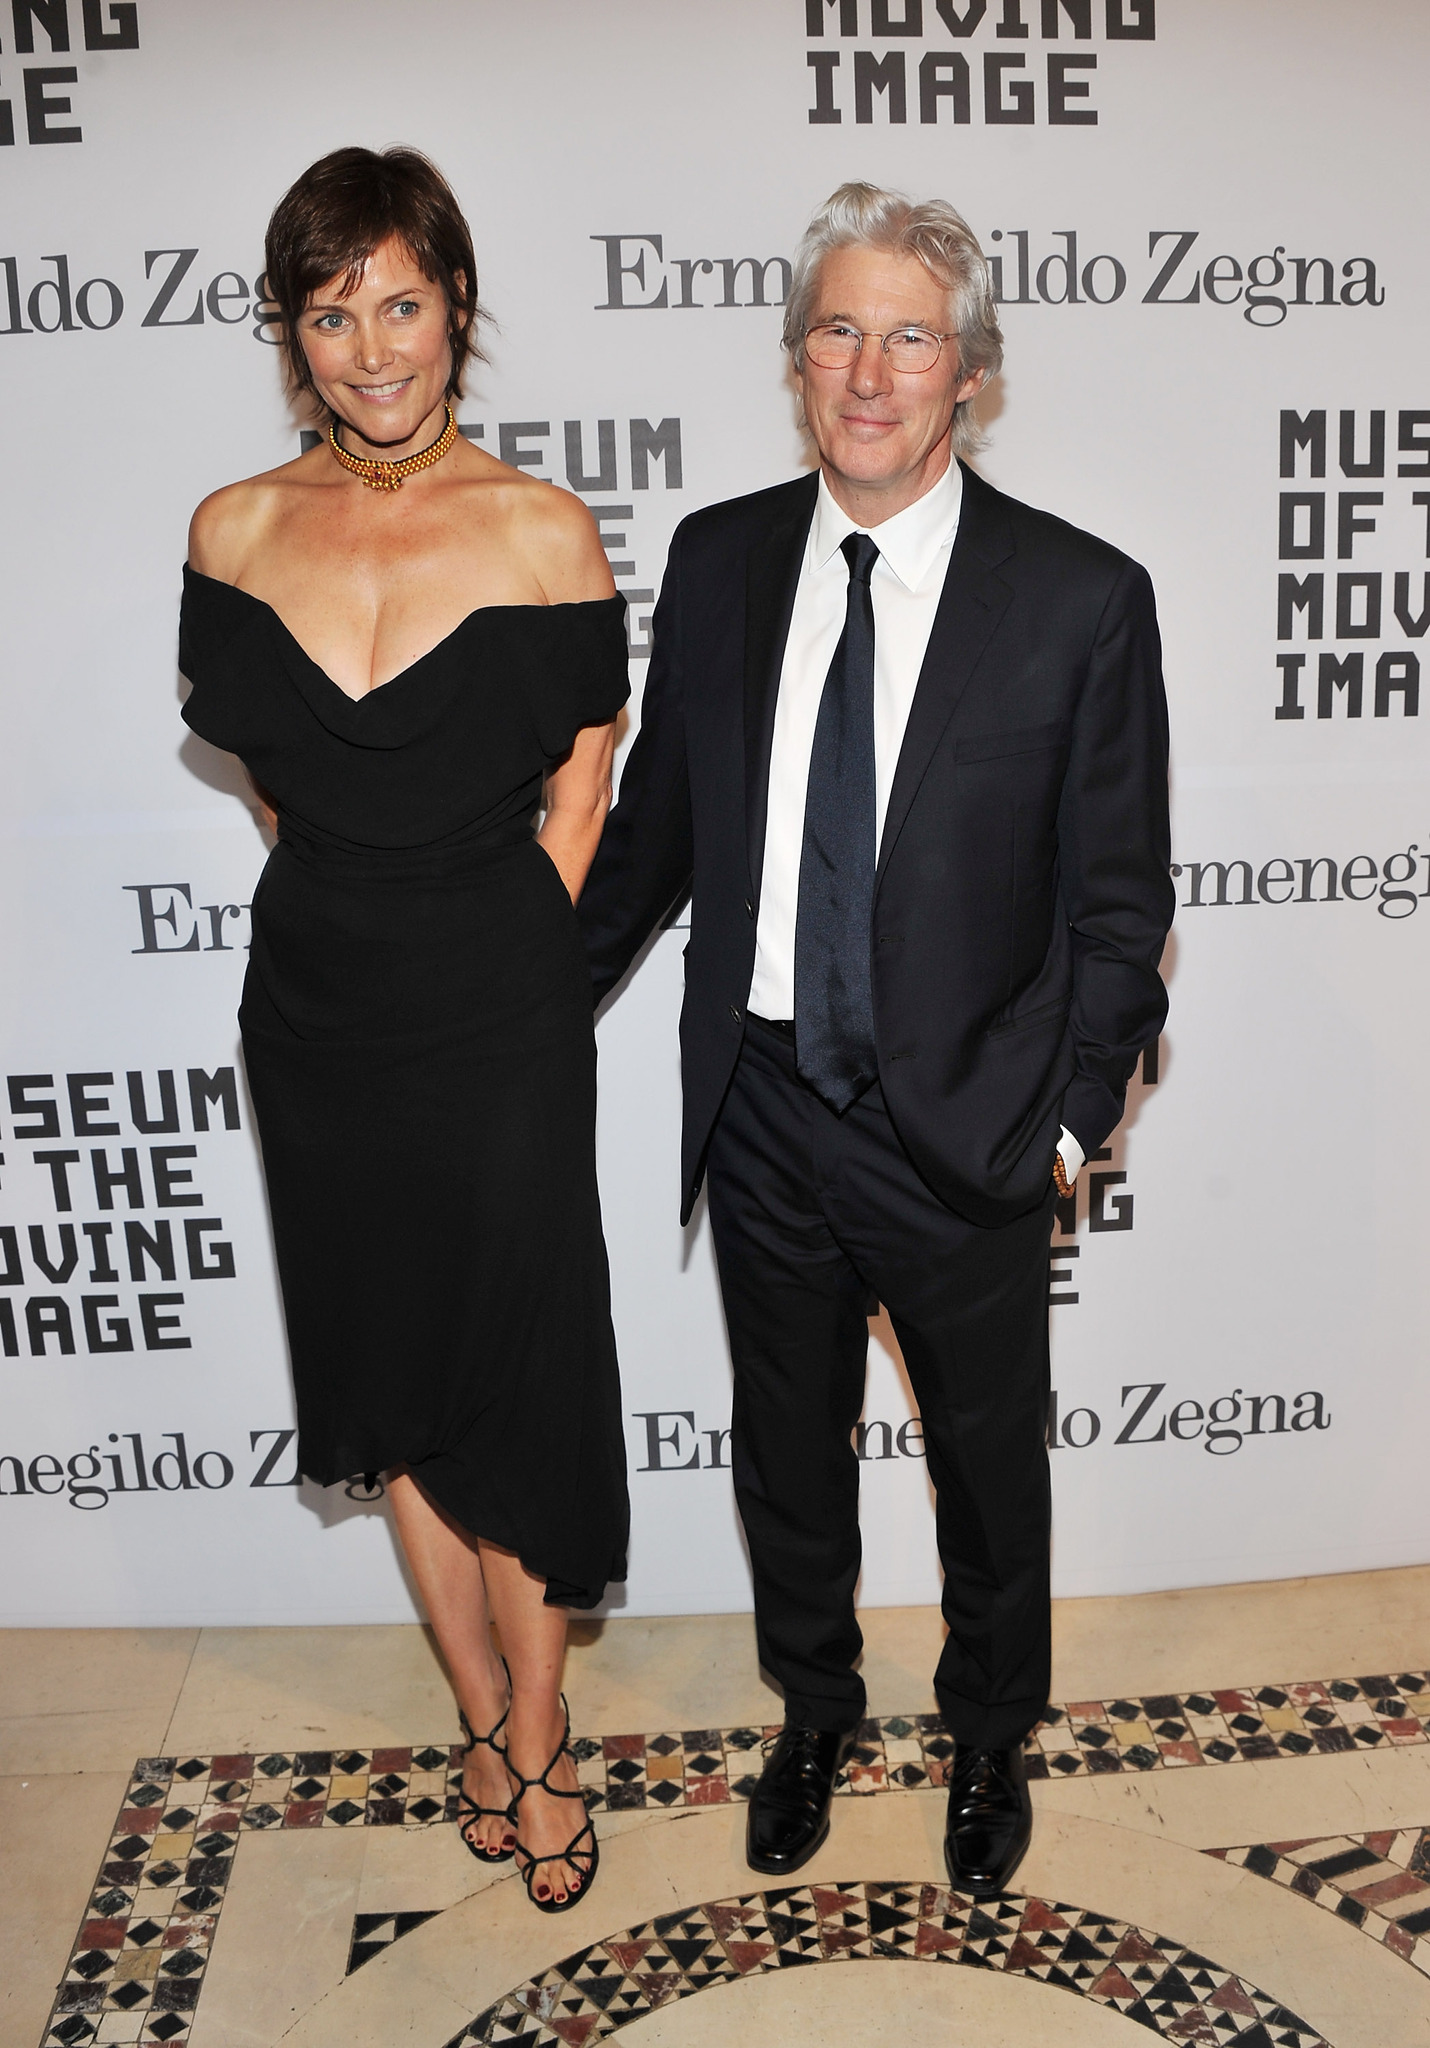 Richard Gere and Carey Lowell